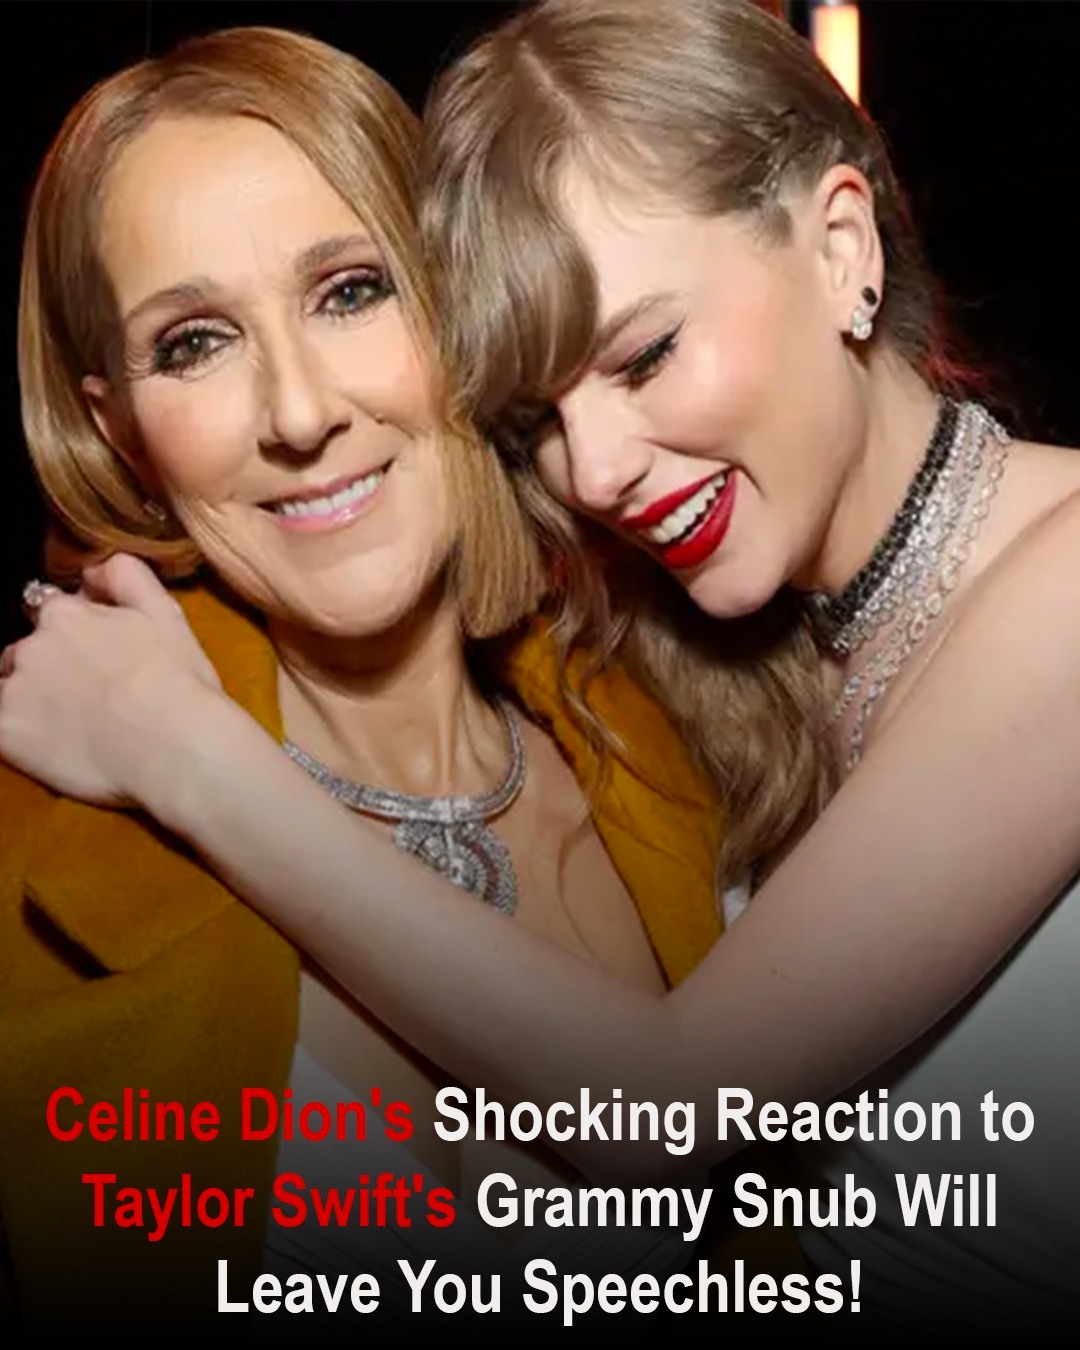 Celine Dion’s Shocking Reaction to Taylor Swift’s Grammy Snub Will Leave You Speechless!